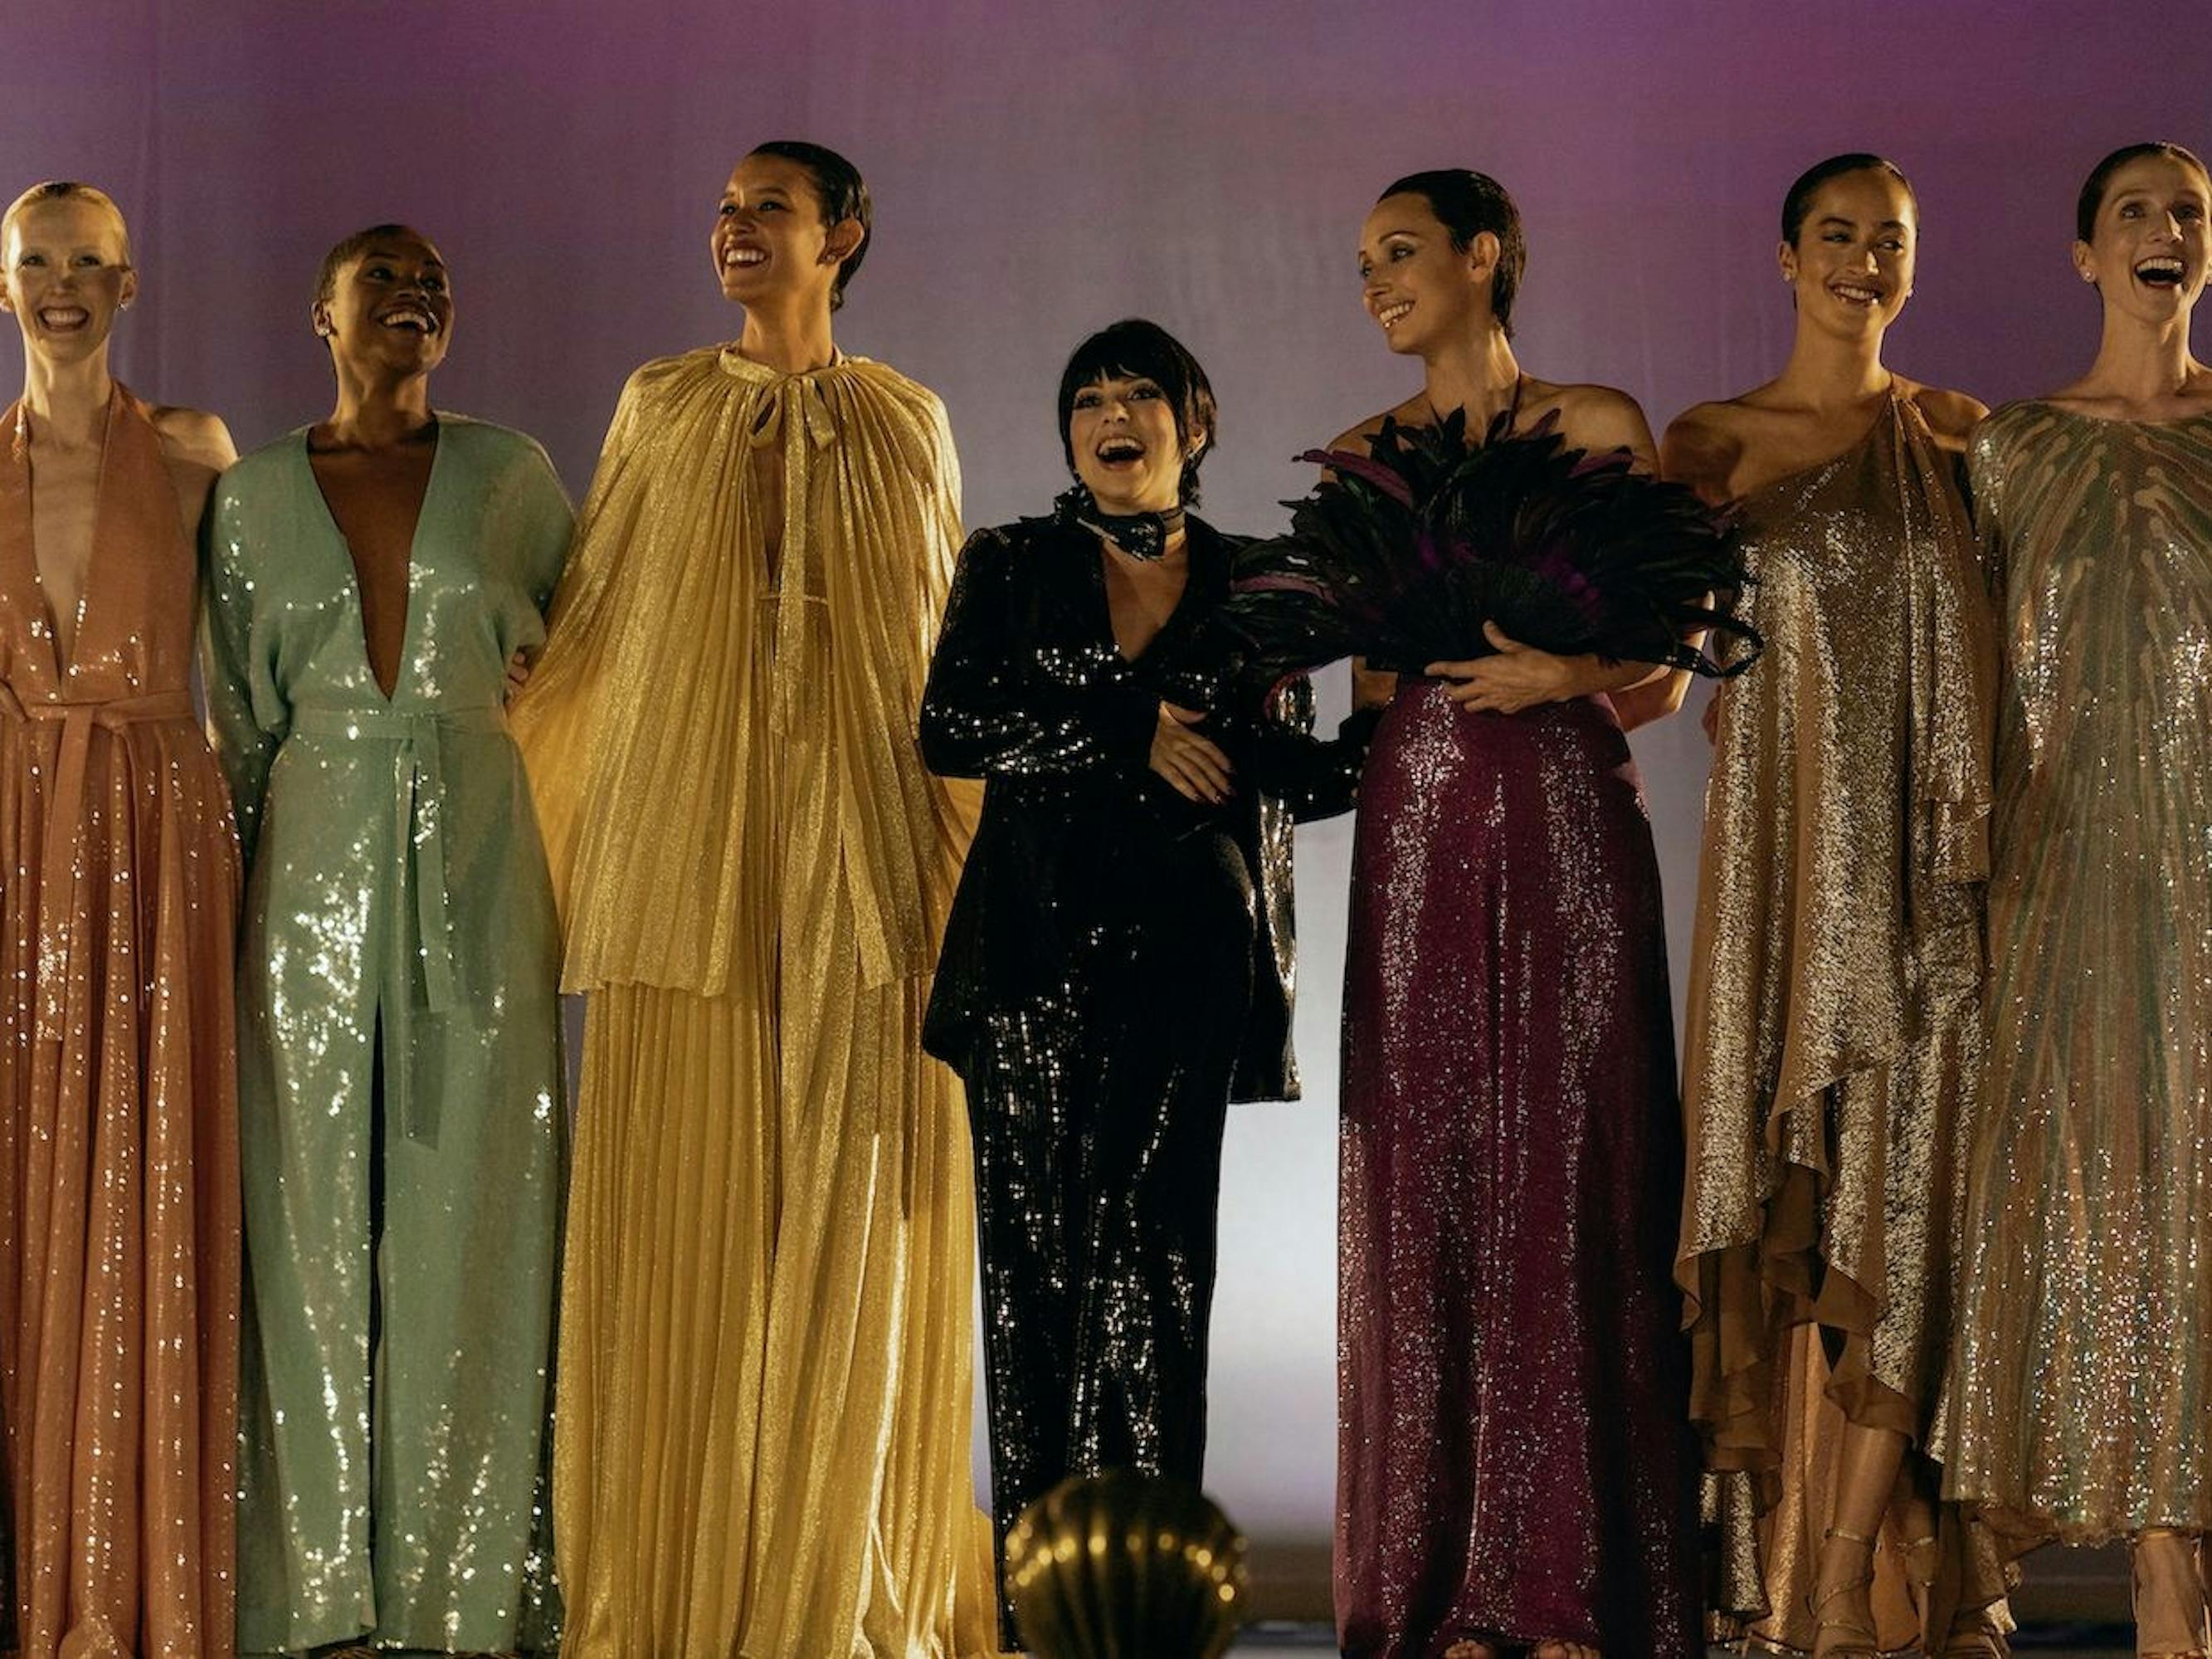 A row of models wear beautiful shimmery gowns. From left to right, there is pink, pistachio green, yellow, black, purple, and metallic gold. Minnelli stands in the middle, in black, next to Peretti in purple. They smile, presumably at the end of the show.